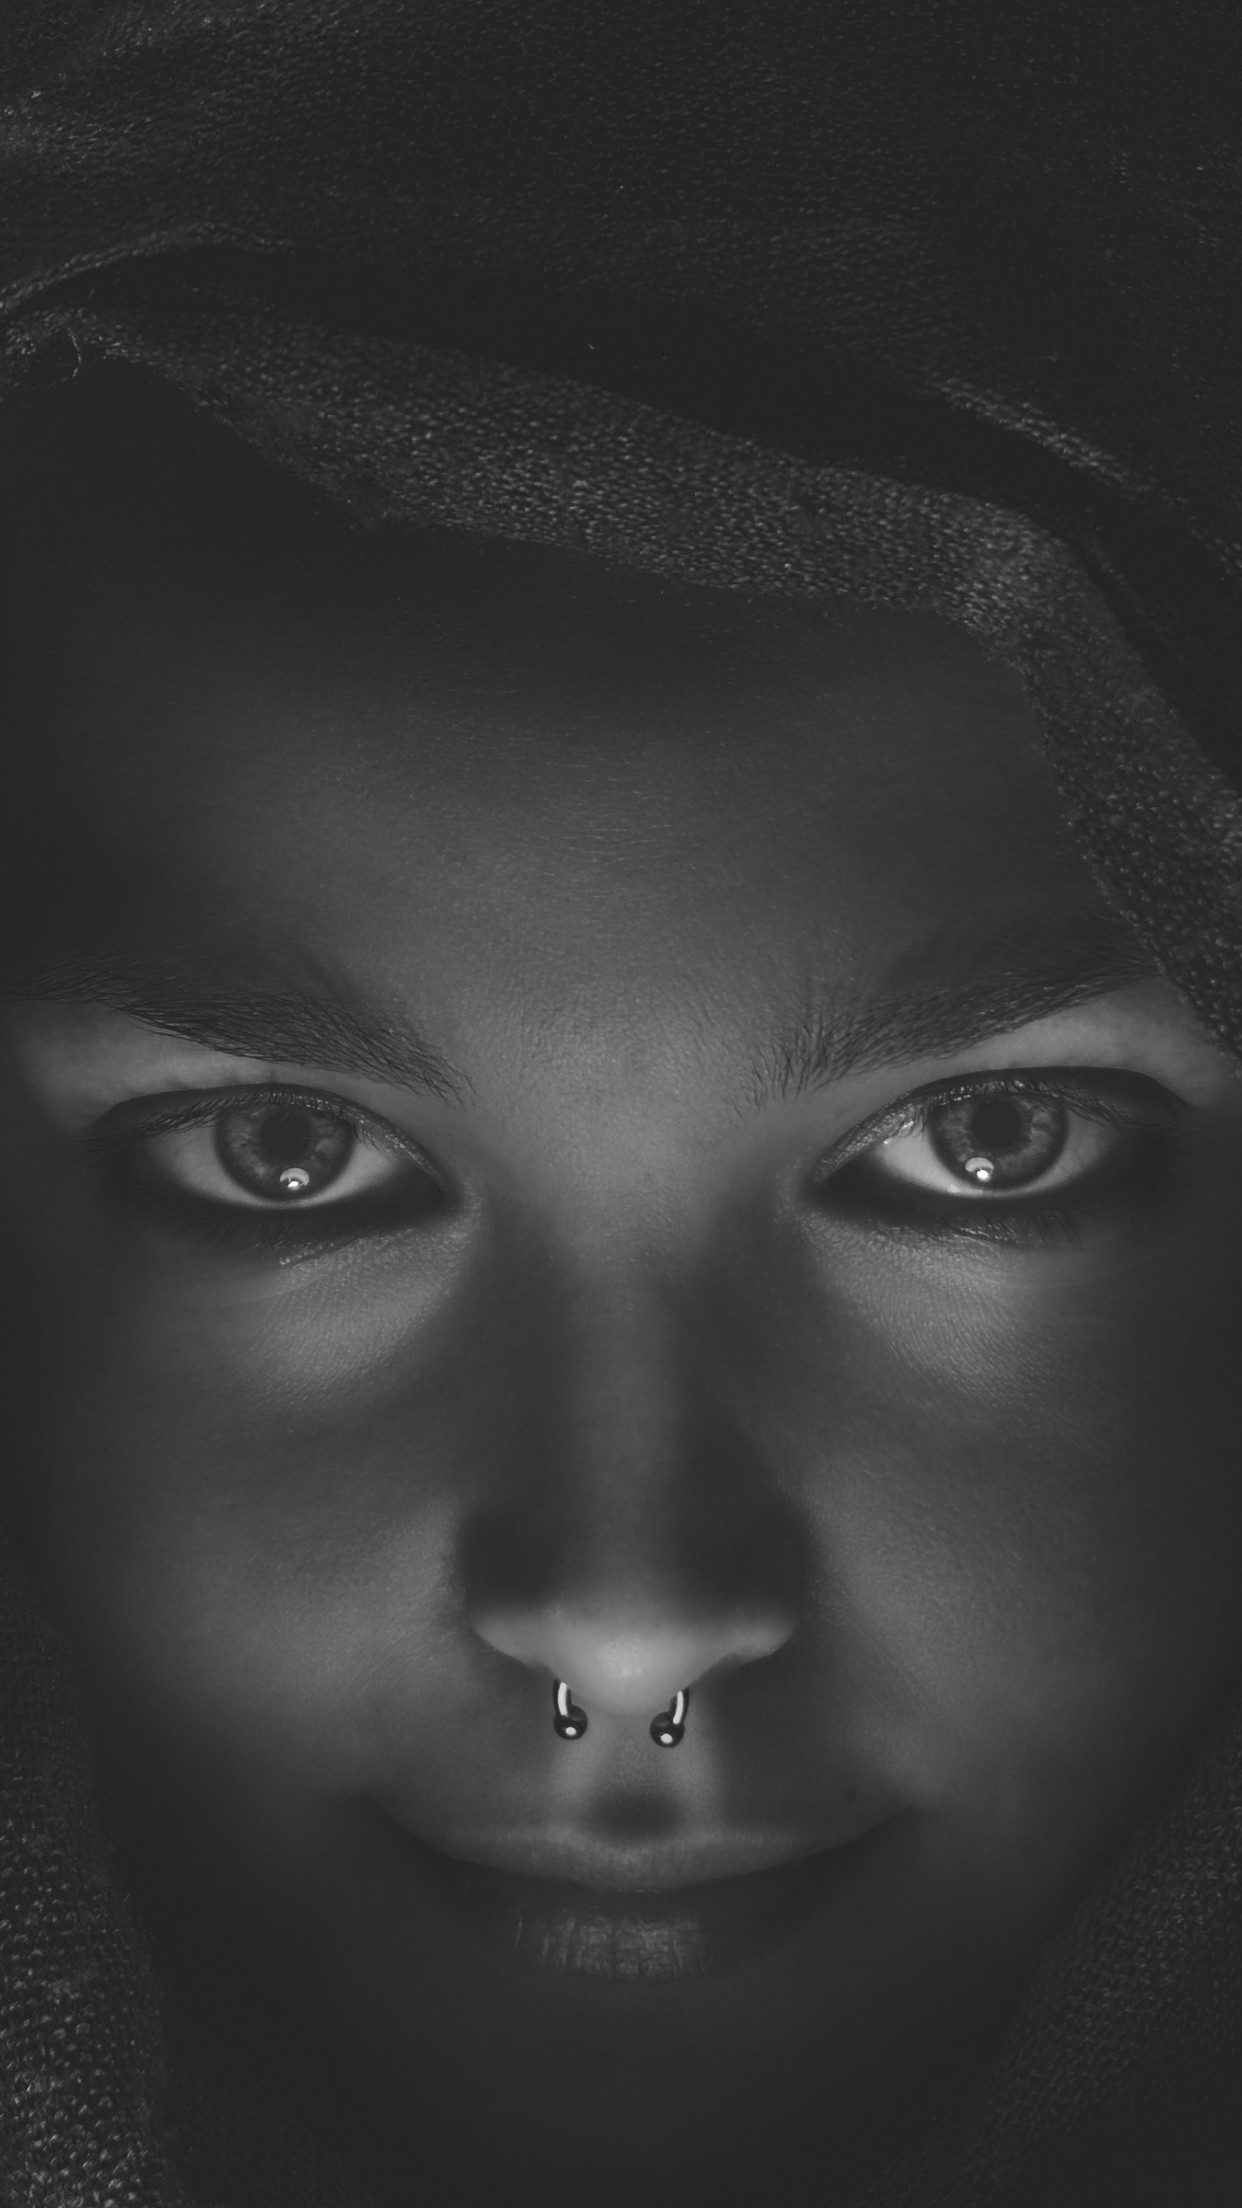 Girl with piercing wallpaper 1242x2208